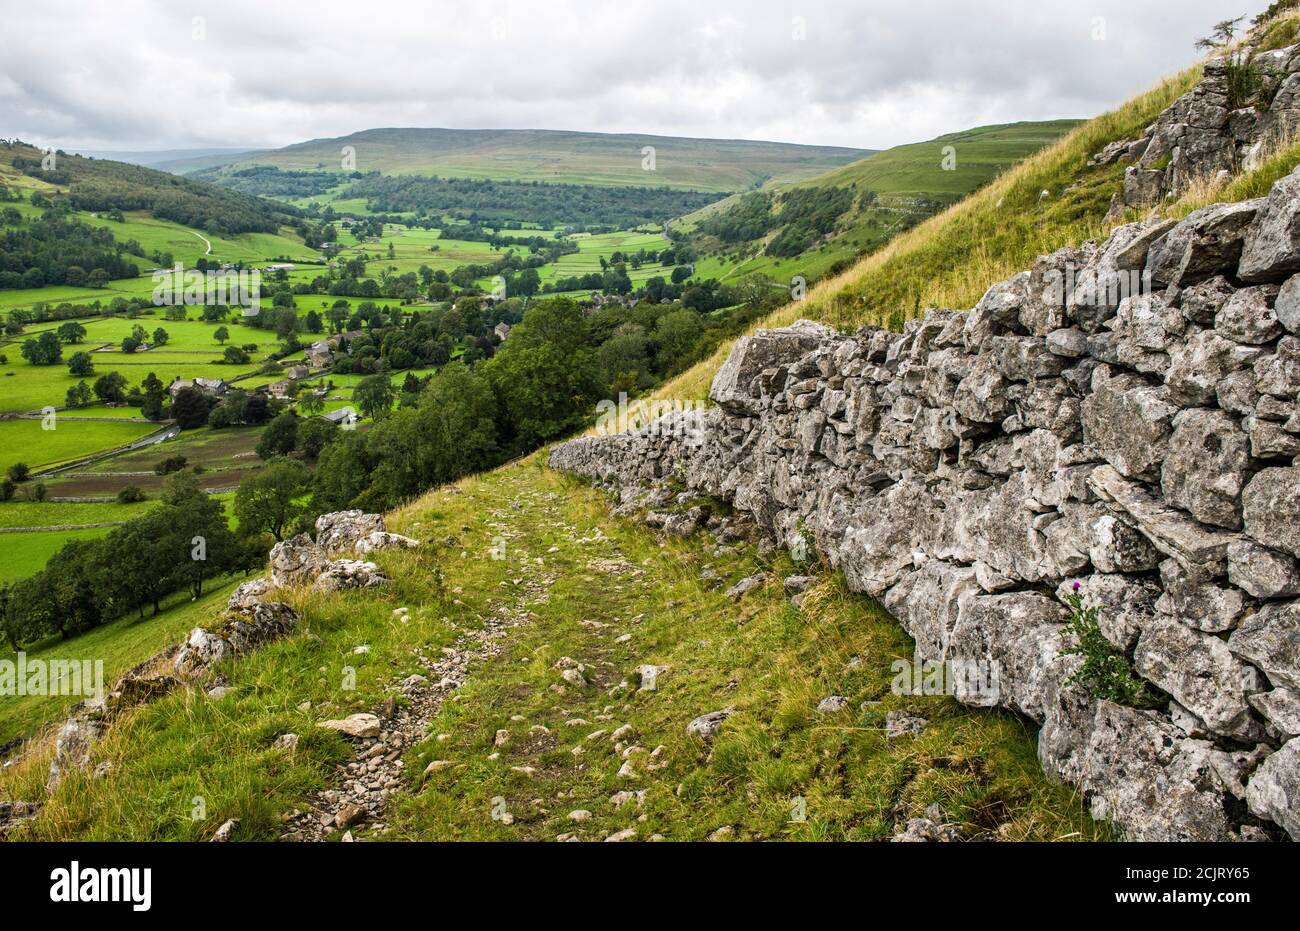 Looking up Upper Wharfedale from footpath walk connecting Buckden to Kettlewell and further up the dale. The vlllage below is Buckden Yorkshire  Dales Stock Photo